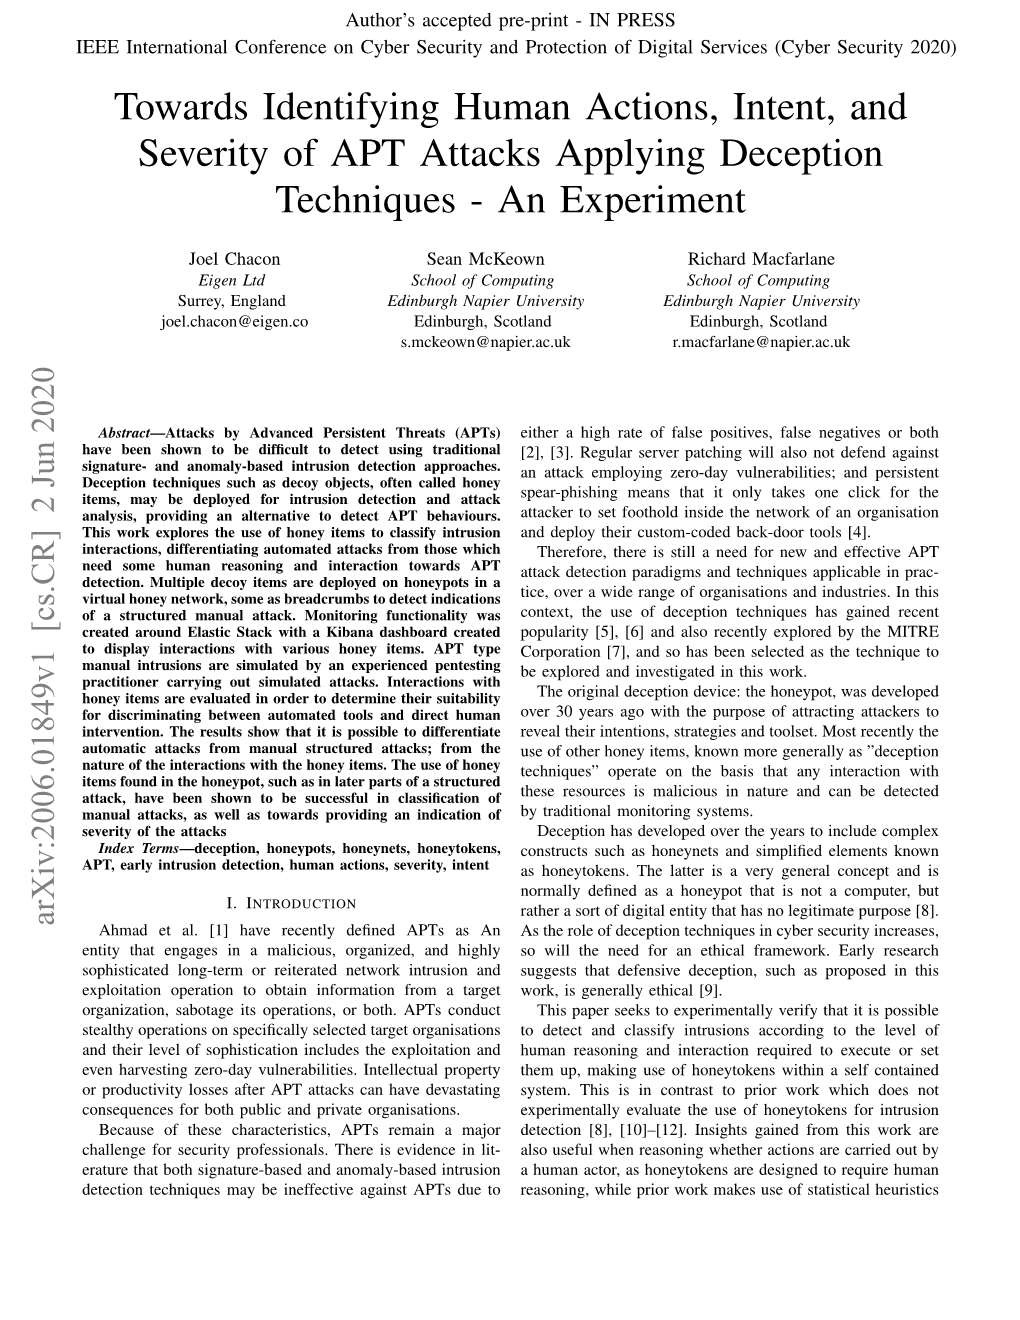 Towards Identifying Human Actions, Intent, and Severity of APT Attacks Applying Deception Techniques - an Experiment